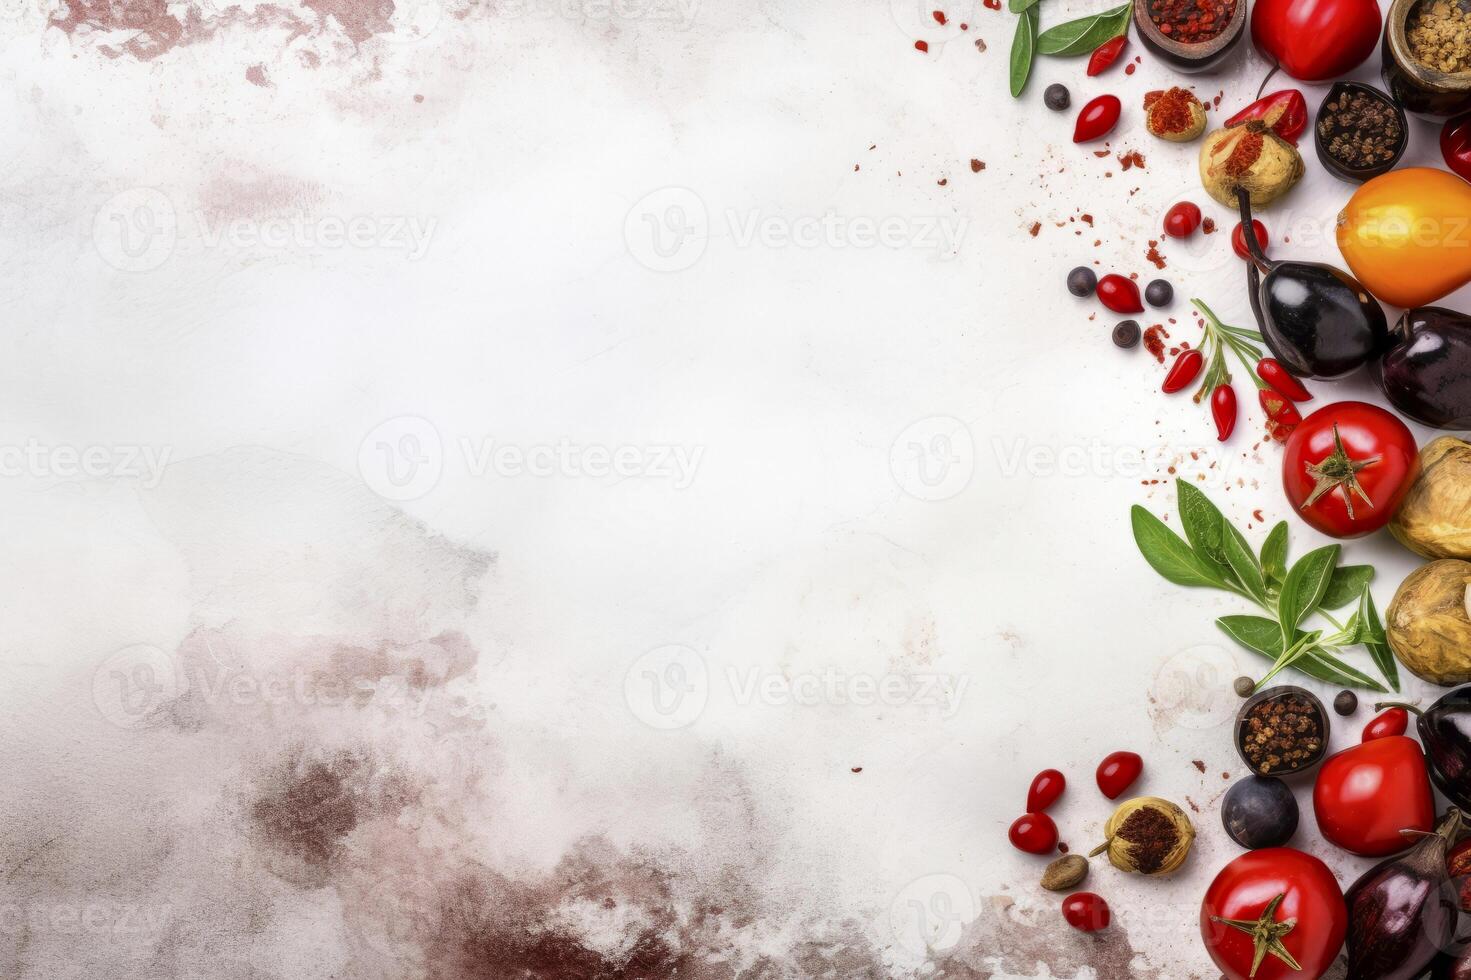 Top view of Mediterranean food ingredients neatly arranged on a pristine white background photo